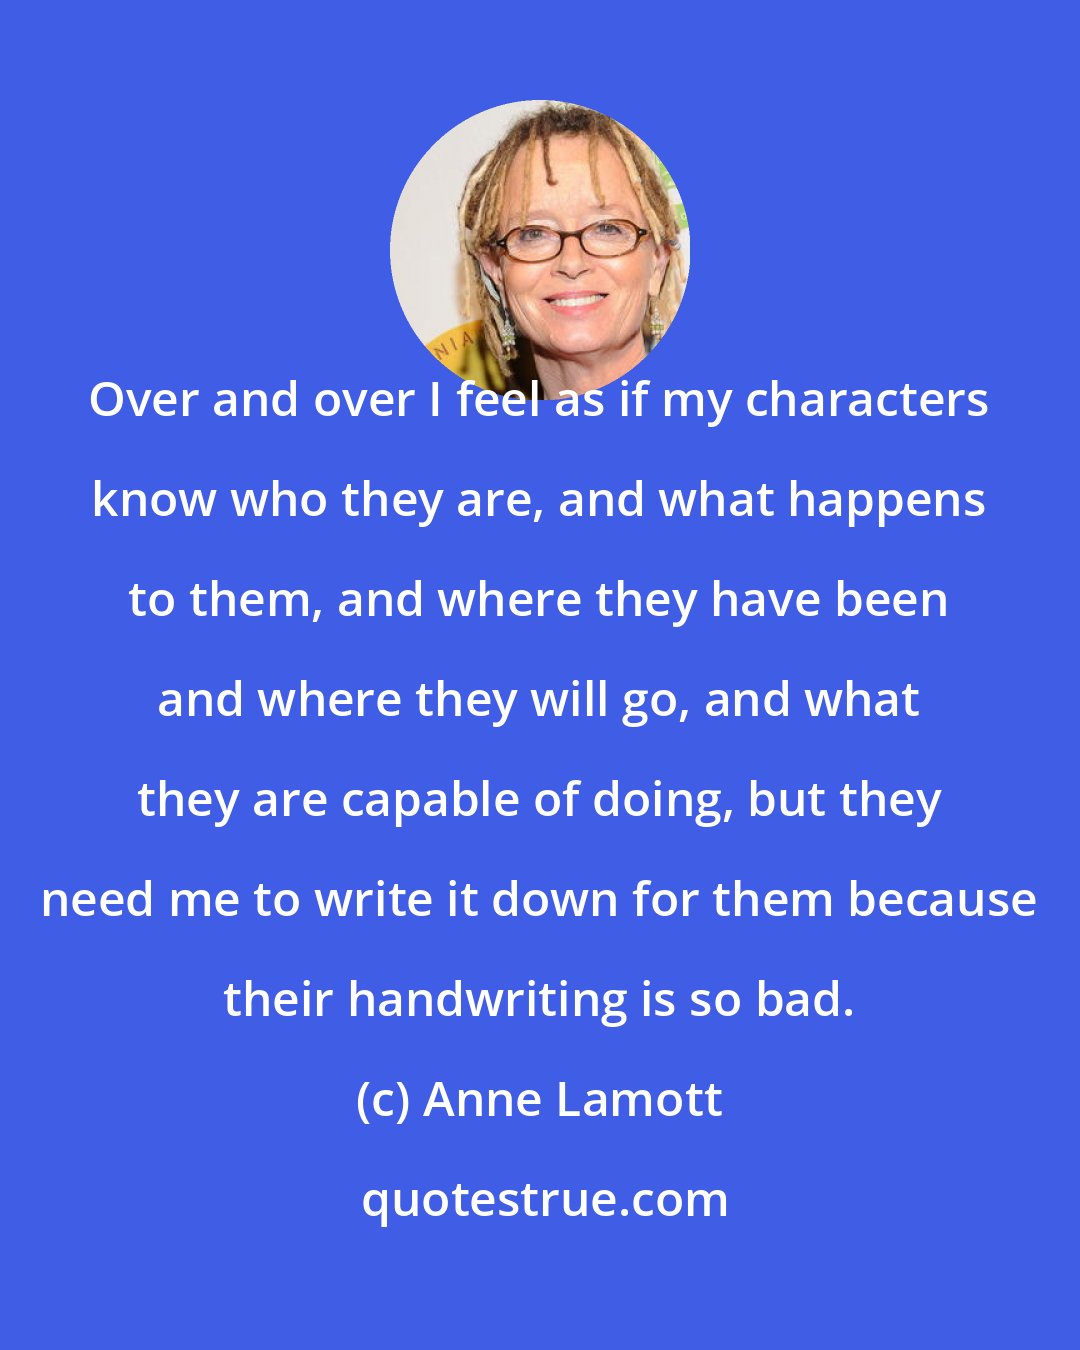 Anne Lamott: Over and over I feel as if my characters know who they are, and what happens to them, and where they have been and where they will go, and what they are capable of doing, but they need me to write it down for them because their handwriting is so bad.